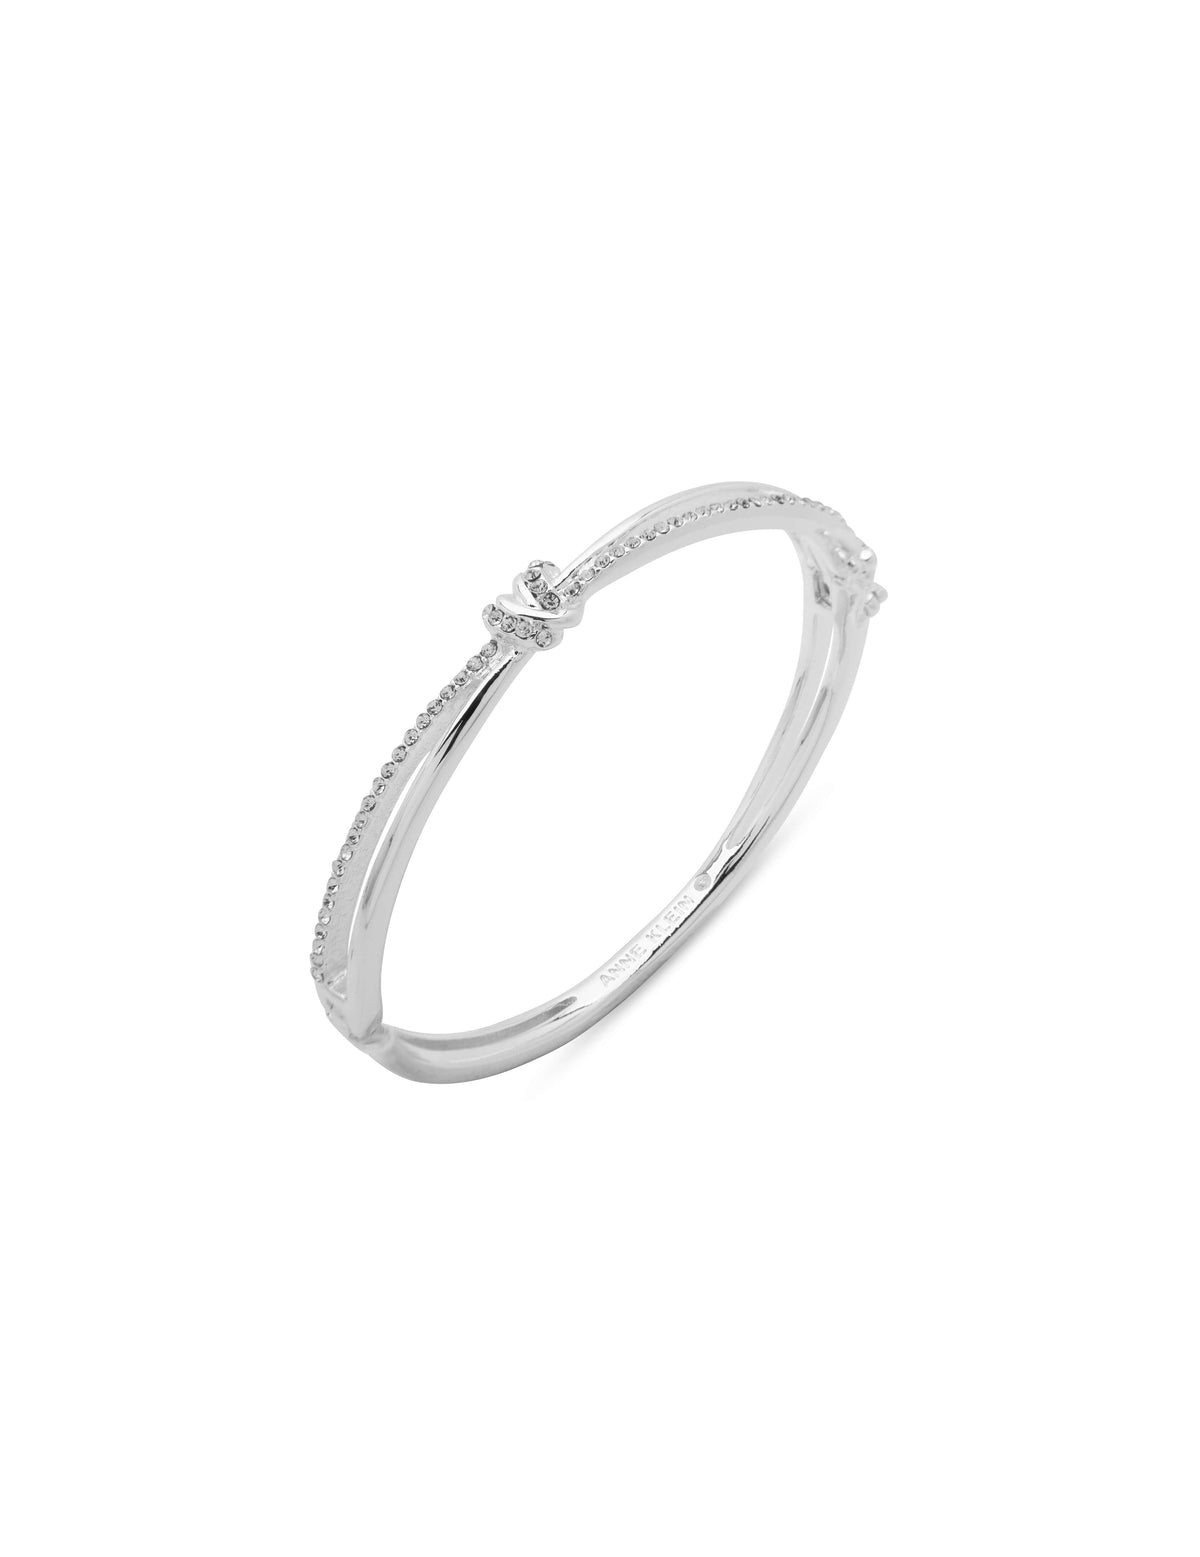 Anne Klein Silver Tone Hinge Bangle With Knot Bracelet